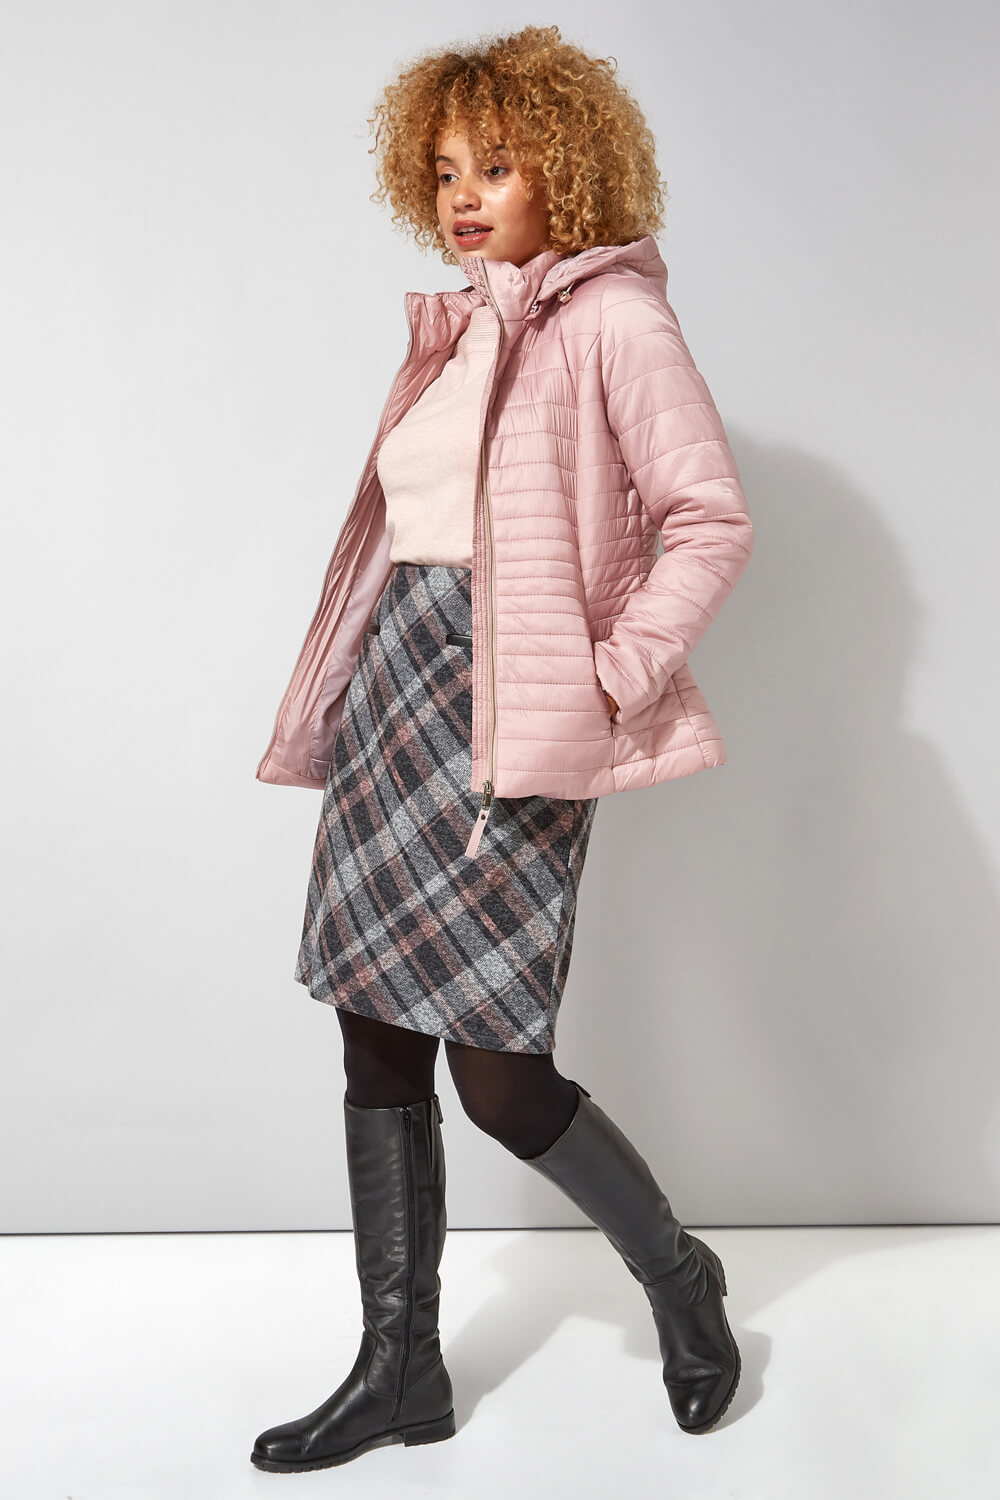 PINK Hooded Zip Through Padded Coat, Image 2 of 4